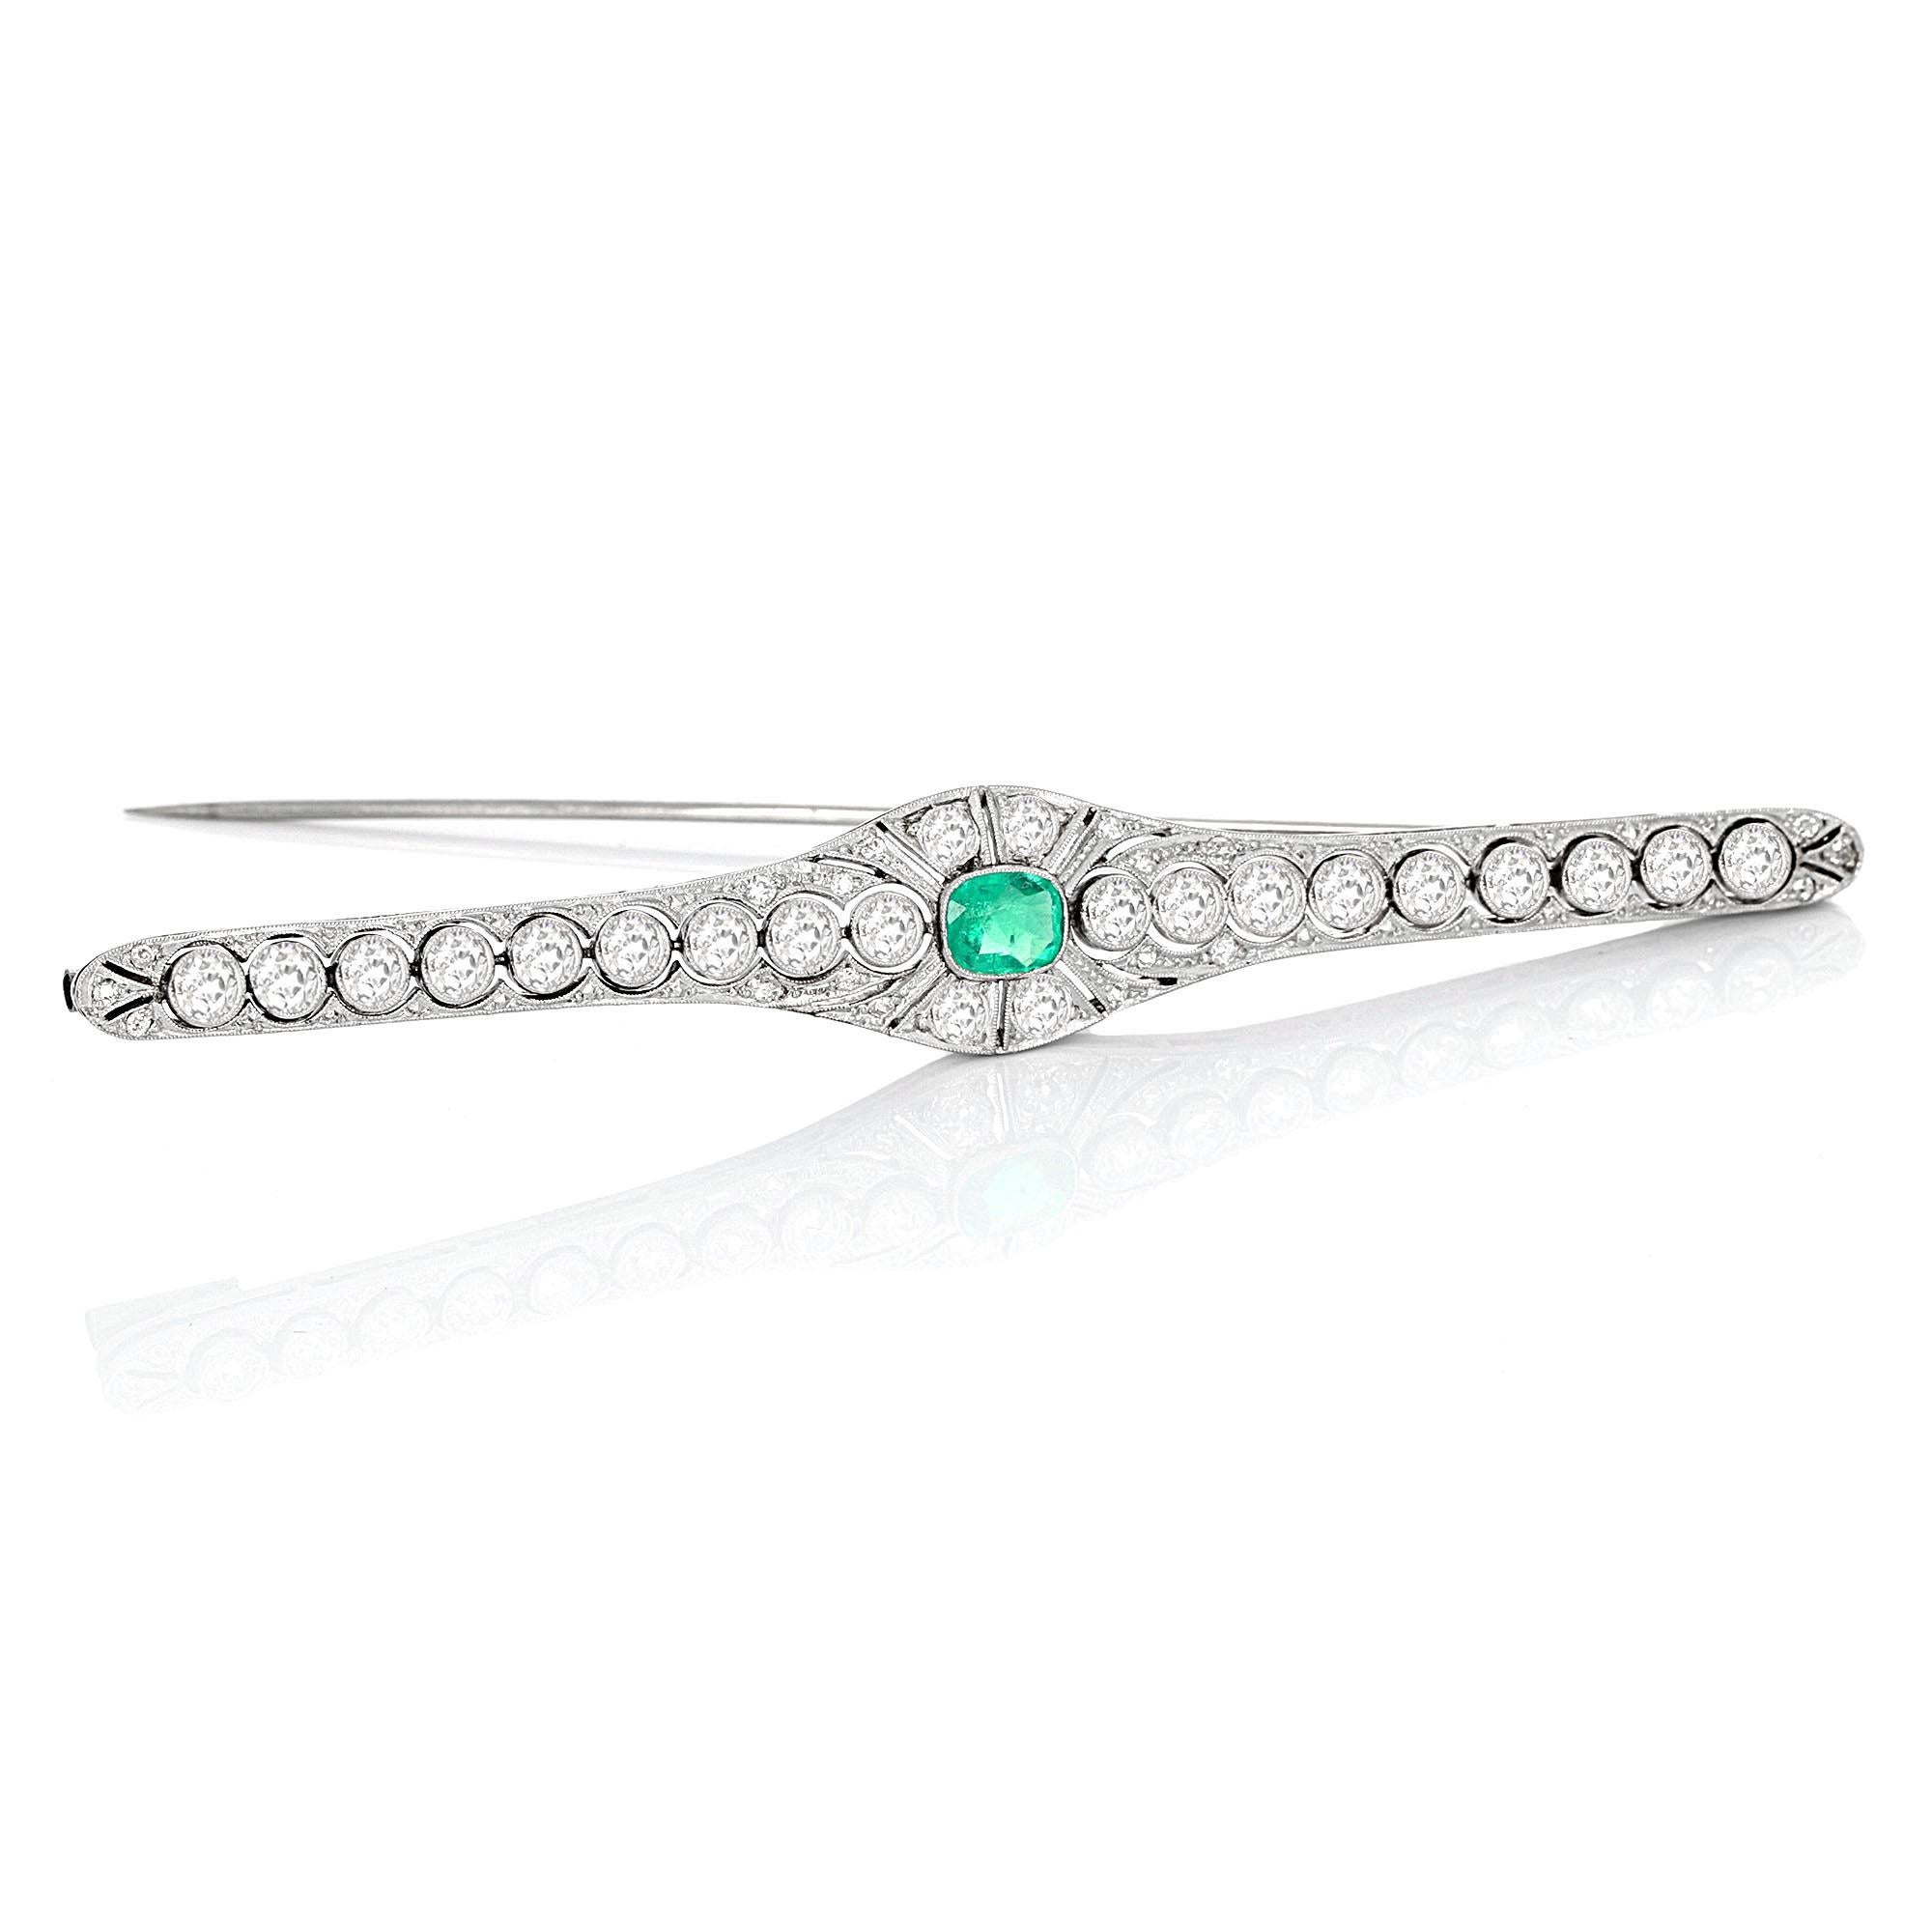 Art Deco platinum antique emerald and diamond bar brooch. The center stone is a cushion cut emerald. There is an estimated 4.25 carat total weight of a white, eye clean, old European cut diamonds.

The brooch measures 3.5 inches x 0.5 inches and